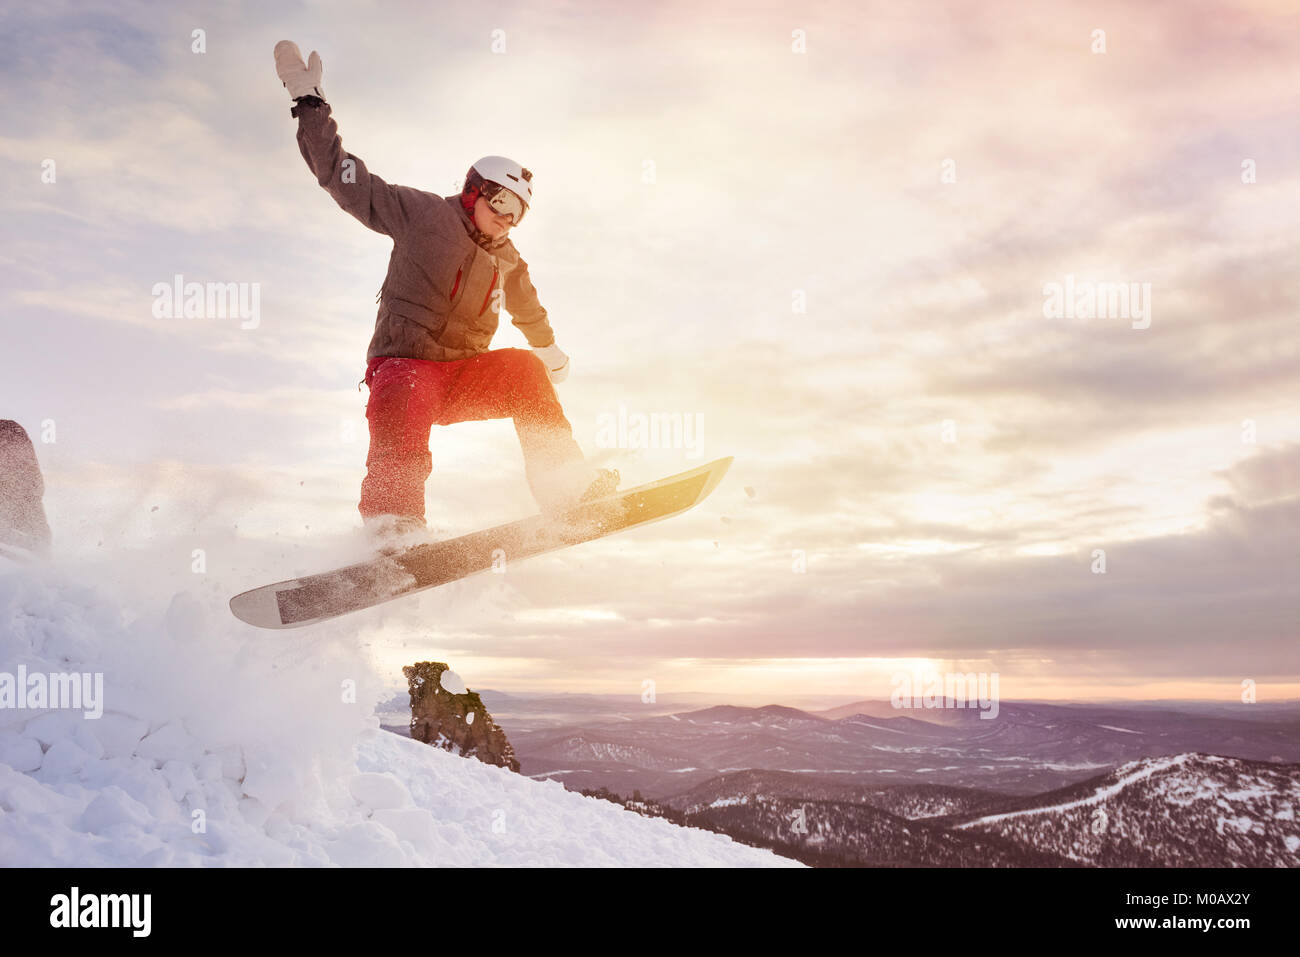 Snowboarder jumps against sunset sky Stock Photo